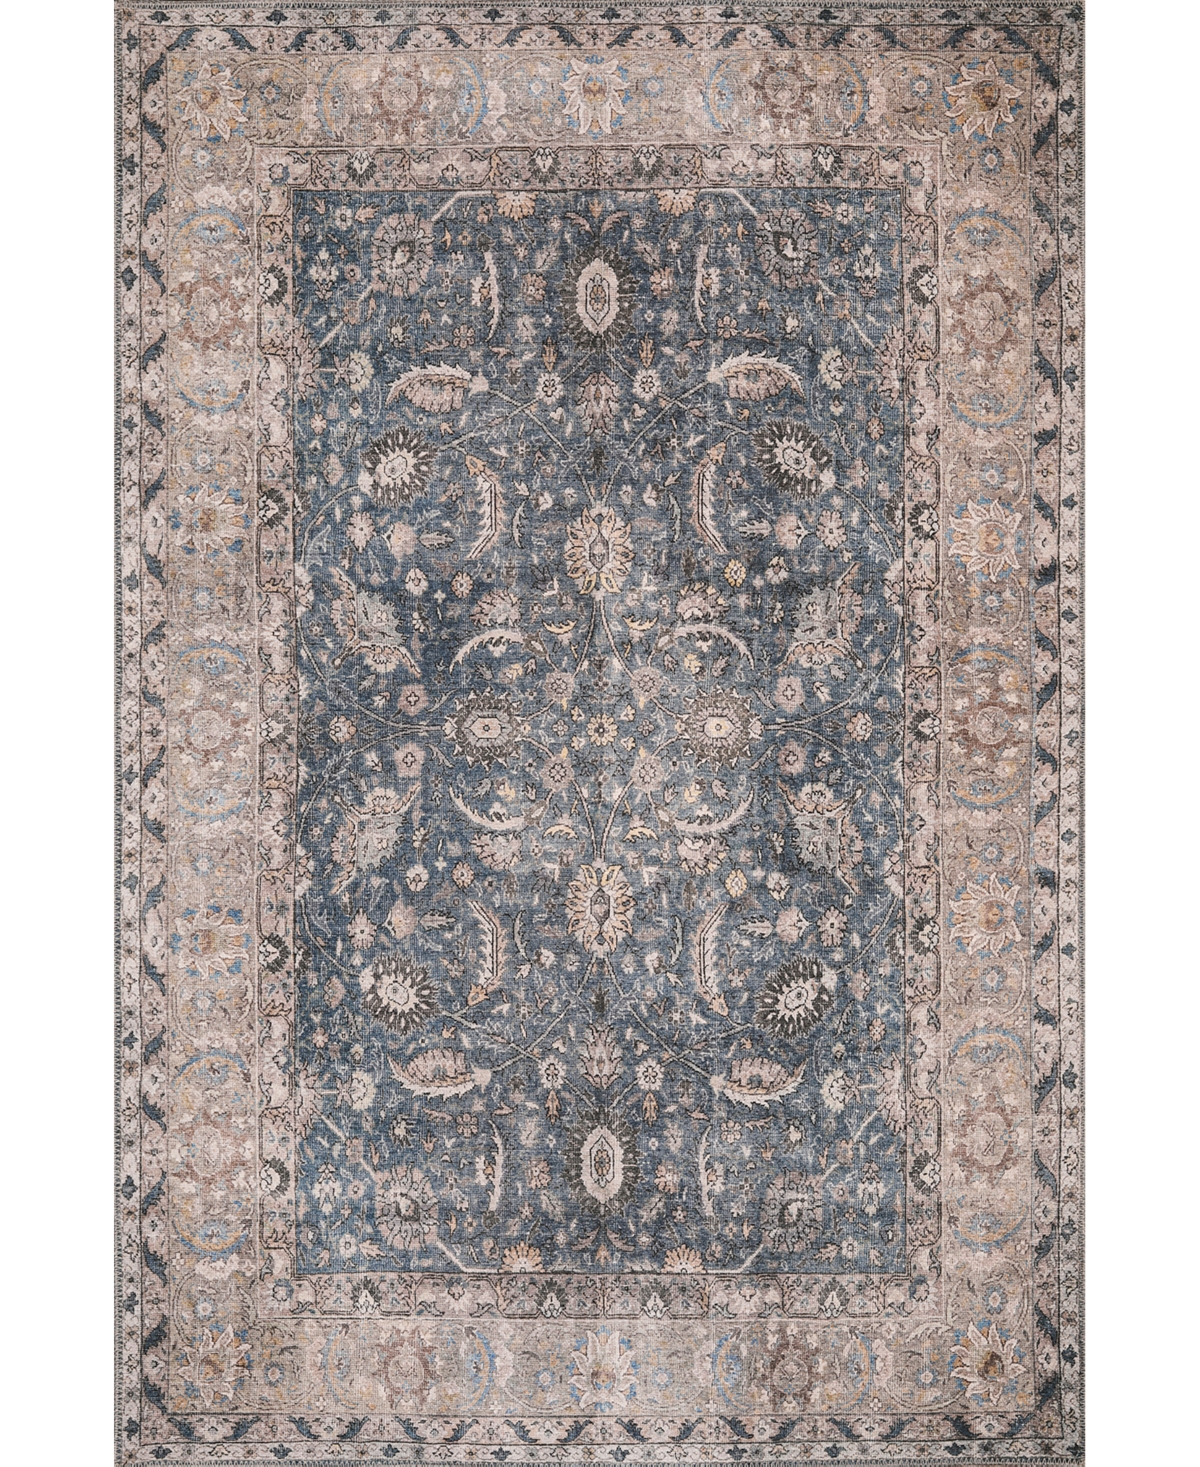 Kas London Machine Washable 4802 2' X 3' Area Rug In Blue